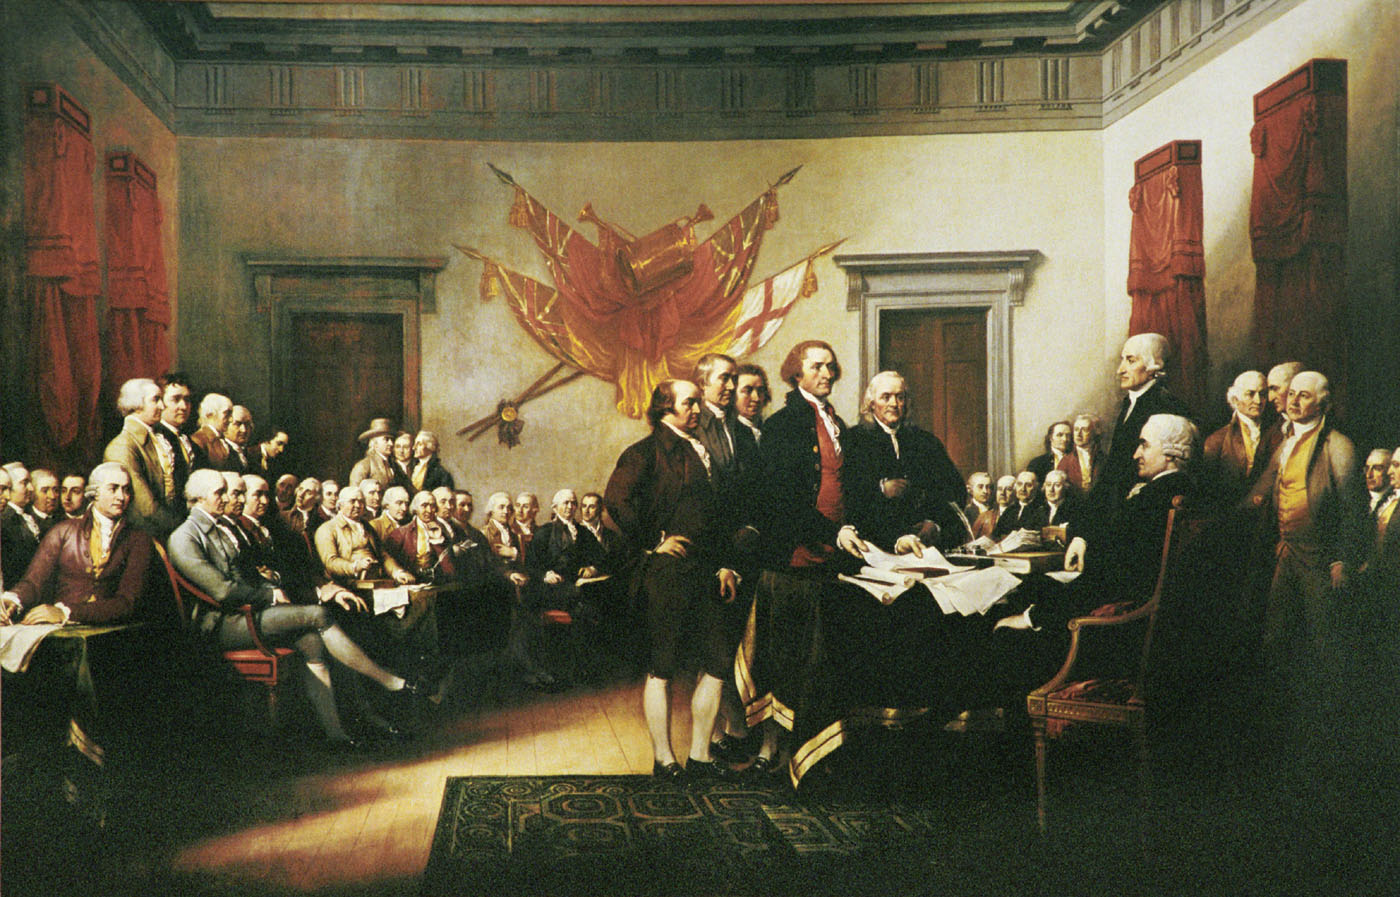 John Trumbull's "Declaration of Independence, July 4, 1776" Source:  http://www.ushistory.org